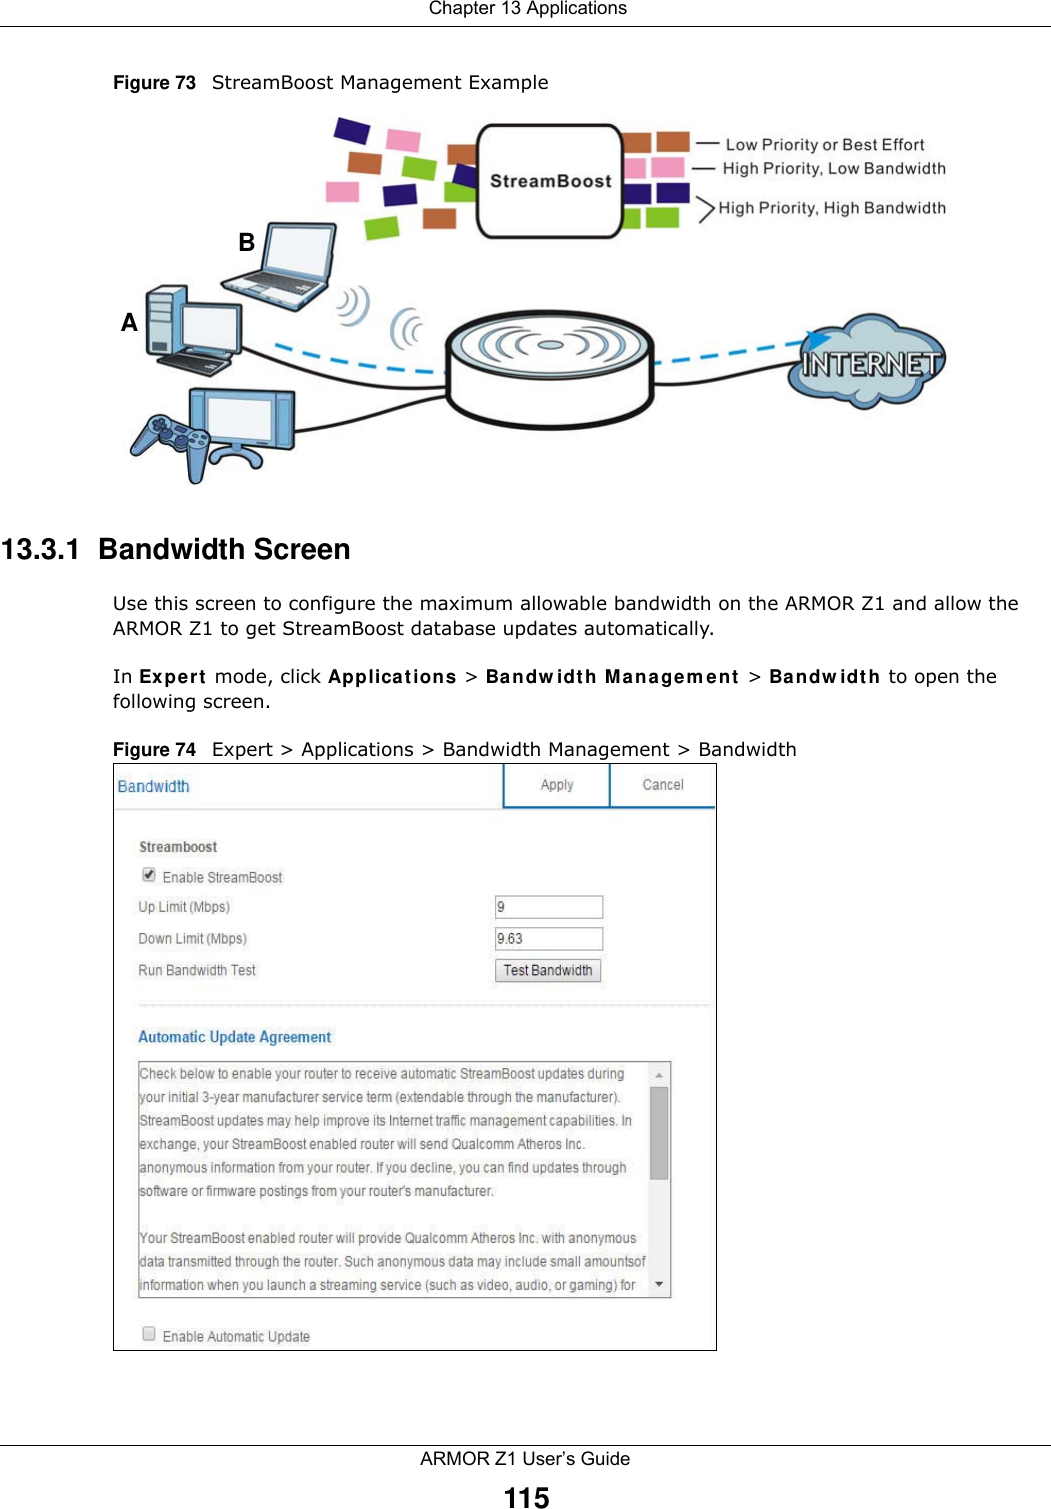  Chapter 13 ApplicationsARMOR Z1 User’s Guide115Figure 73   StreamBoost Management Example13.3.1  Bandwidth ScreenUse this screen to configure the maximum allowable bandwidth on the ARMOR Z1 and allow the ARMOR Z1 to get StreamBoost database updates automatically.In Expert mode, click Applications &gt; Bandwidth Management &gt; Bandwidth to open the following screen.Figure 74   Expert &gt; Applications &gt; Bandwidth Management &gt; Bandwidth AB